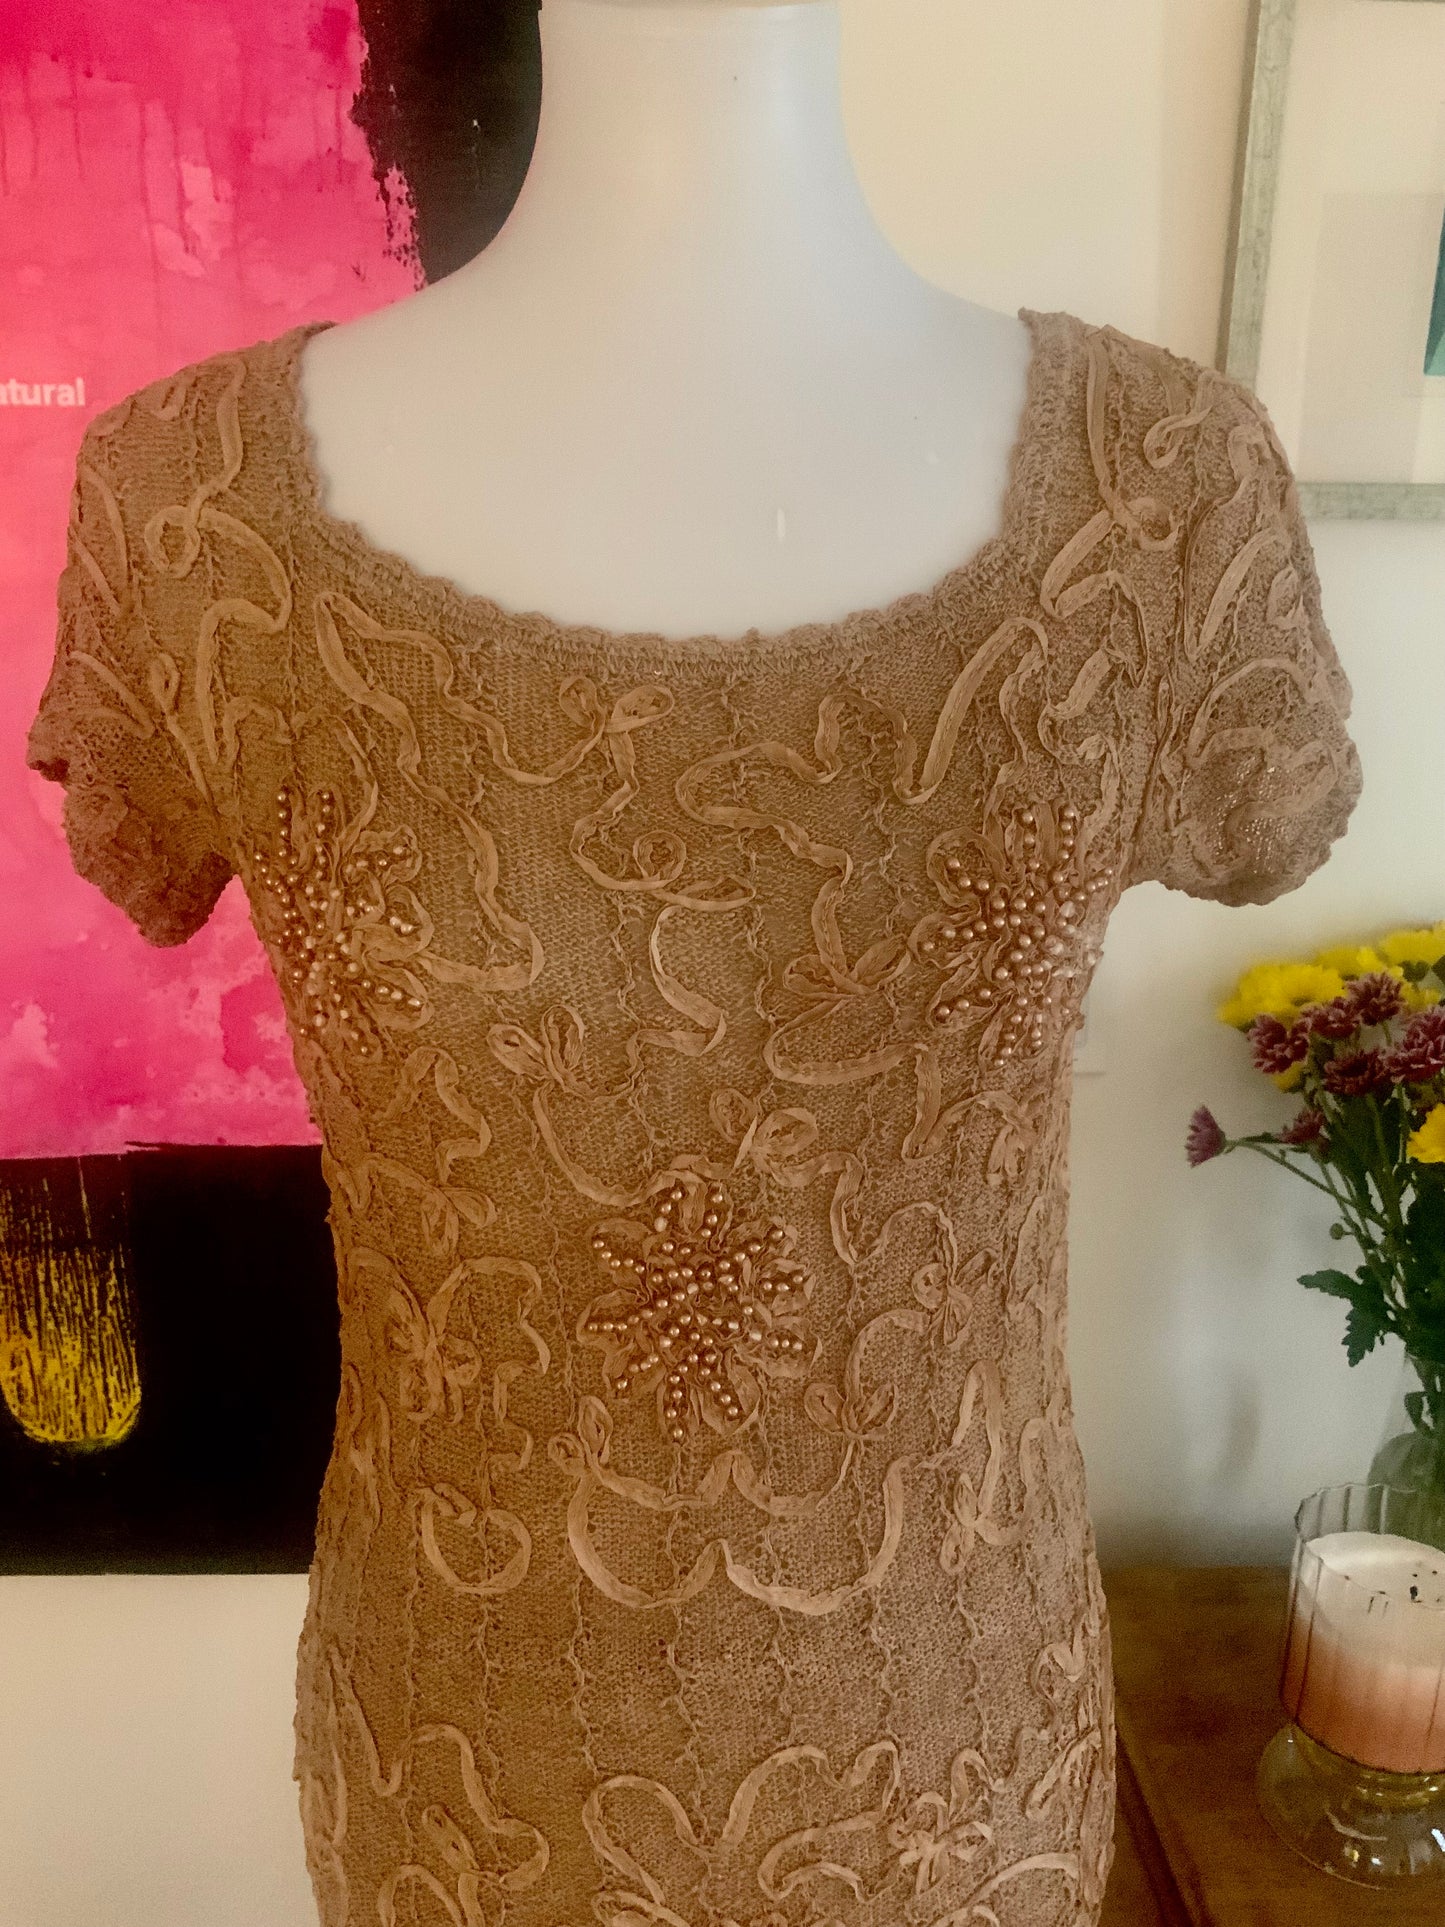 Knitted Dress, Beaded, Soutache Ribbon Embroidery - 30s